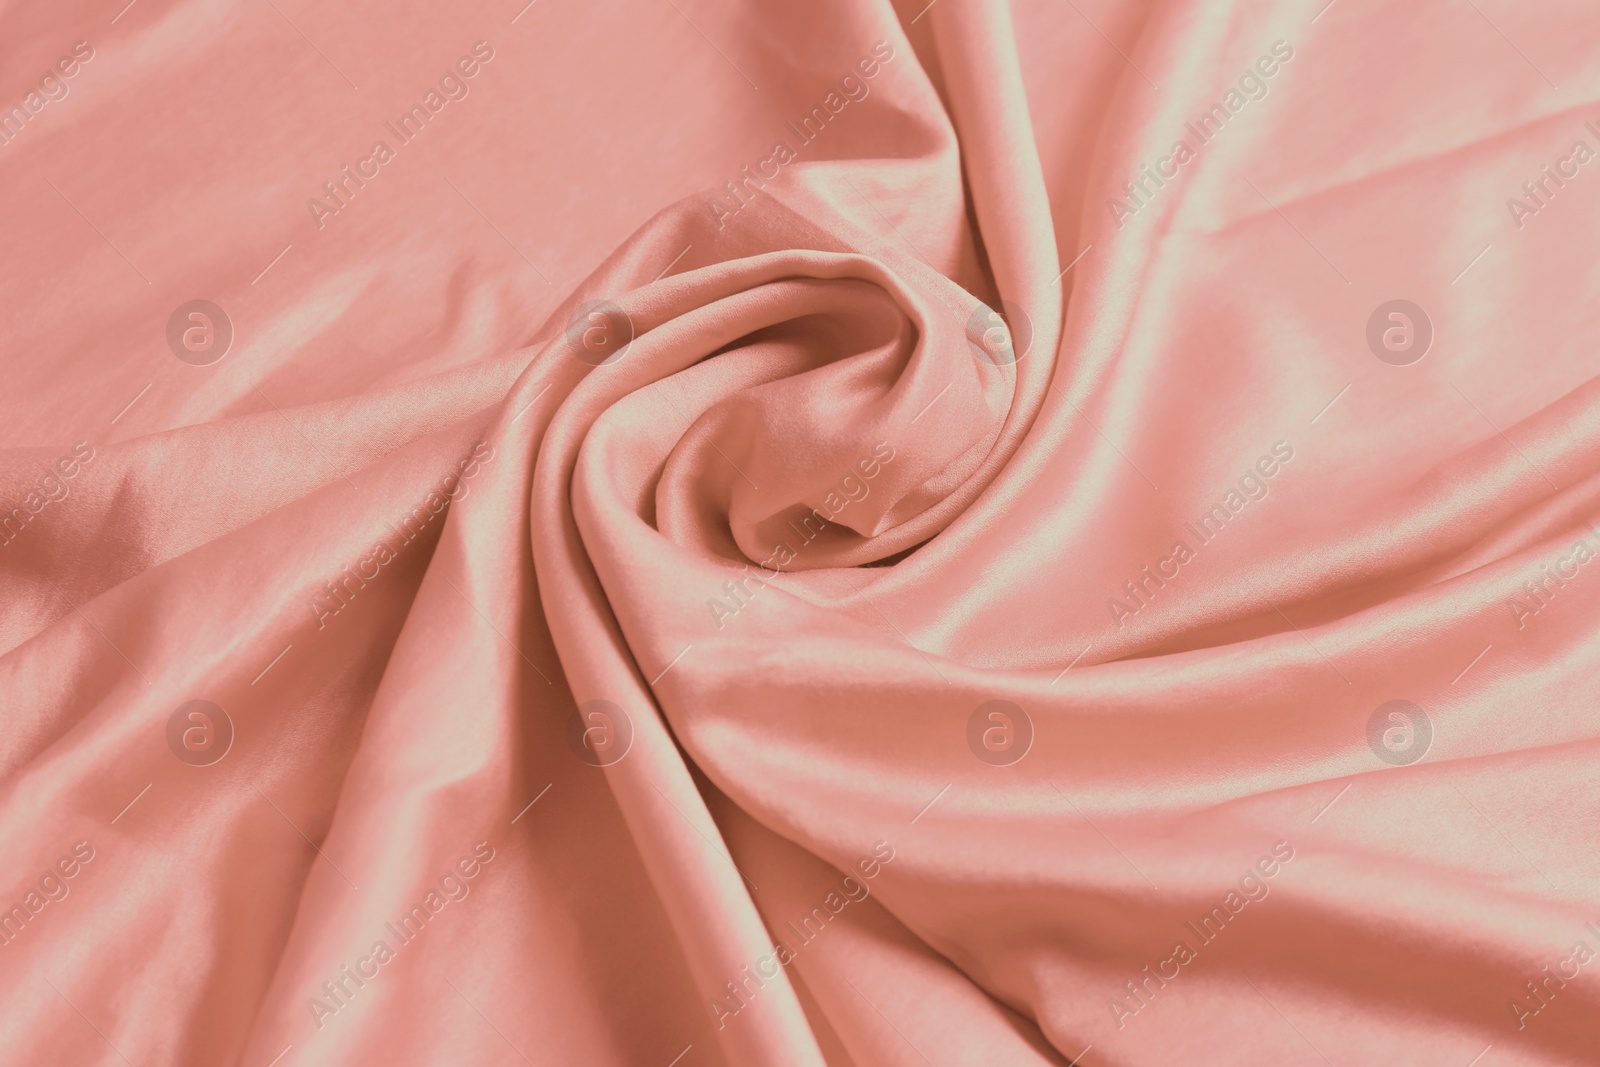 Photo of Pink shiny fabric as background, closeup view